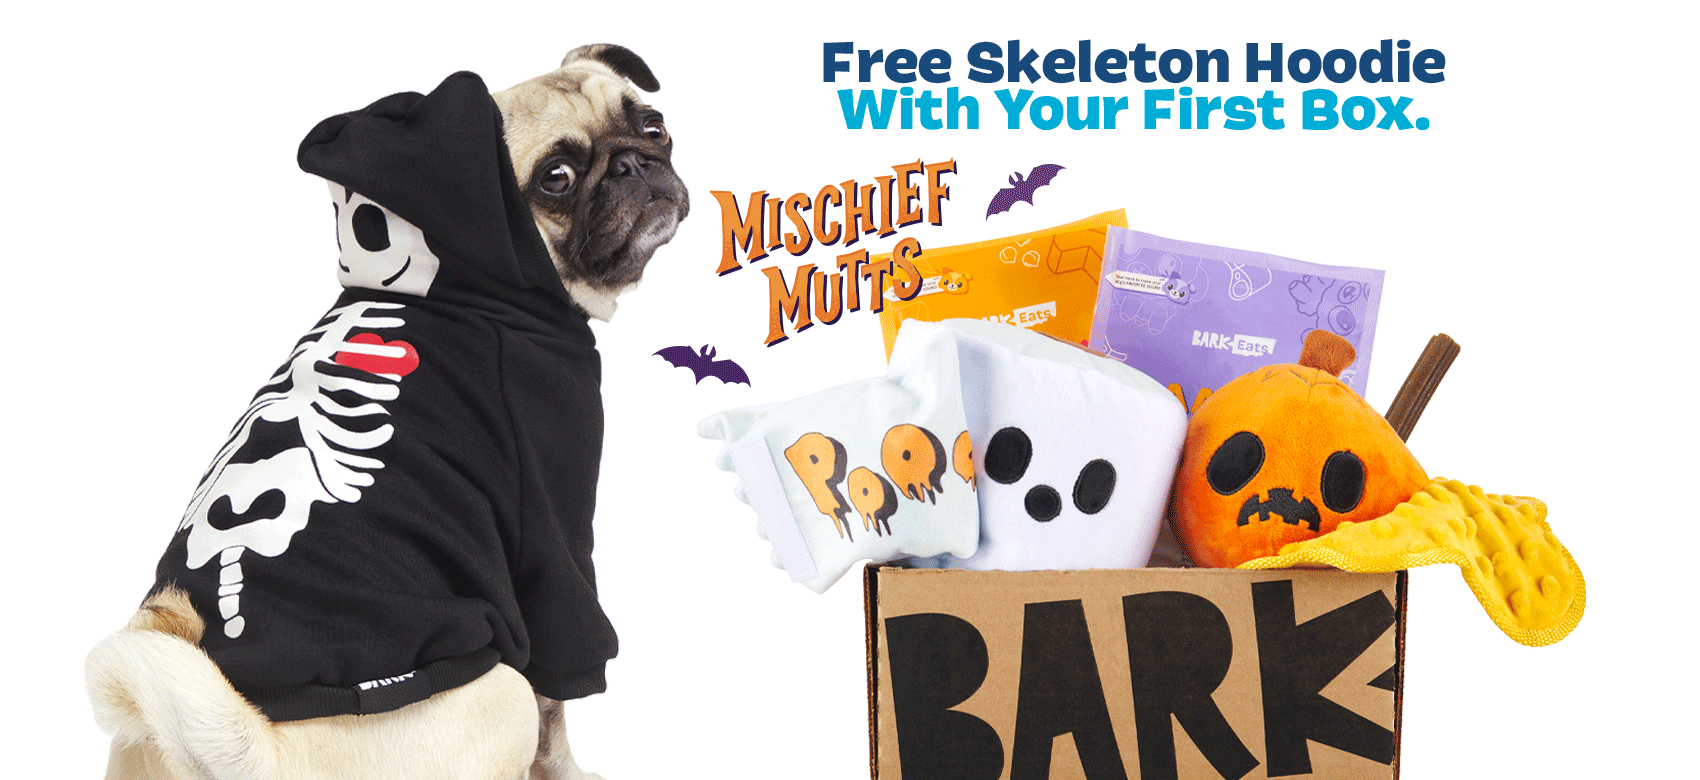 Free Skeleton Hoodie With Your First Box